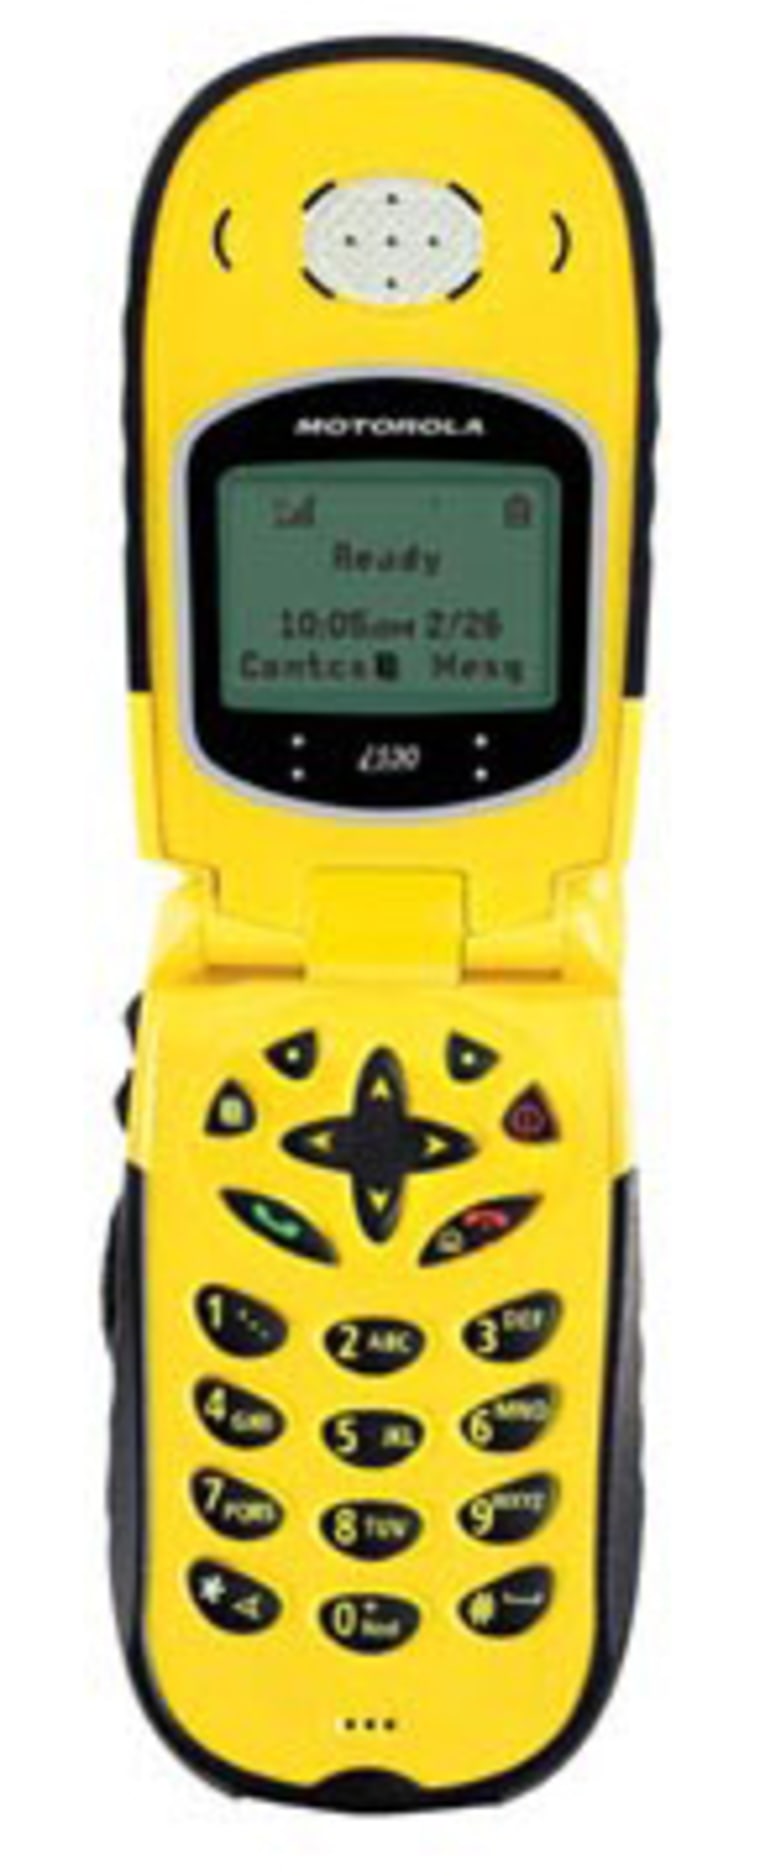 The i530 comes in either all black or bright yellow with the same black rubber covering.